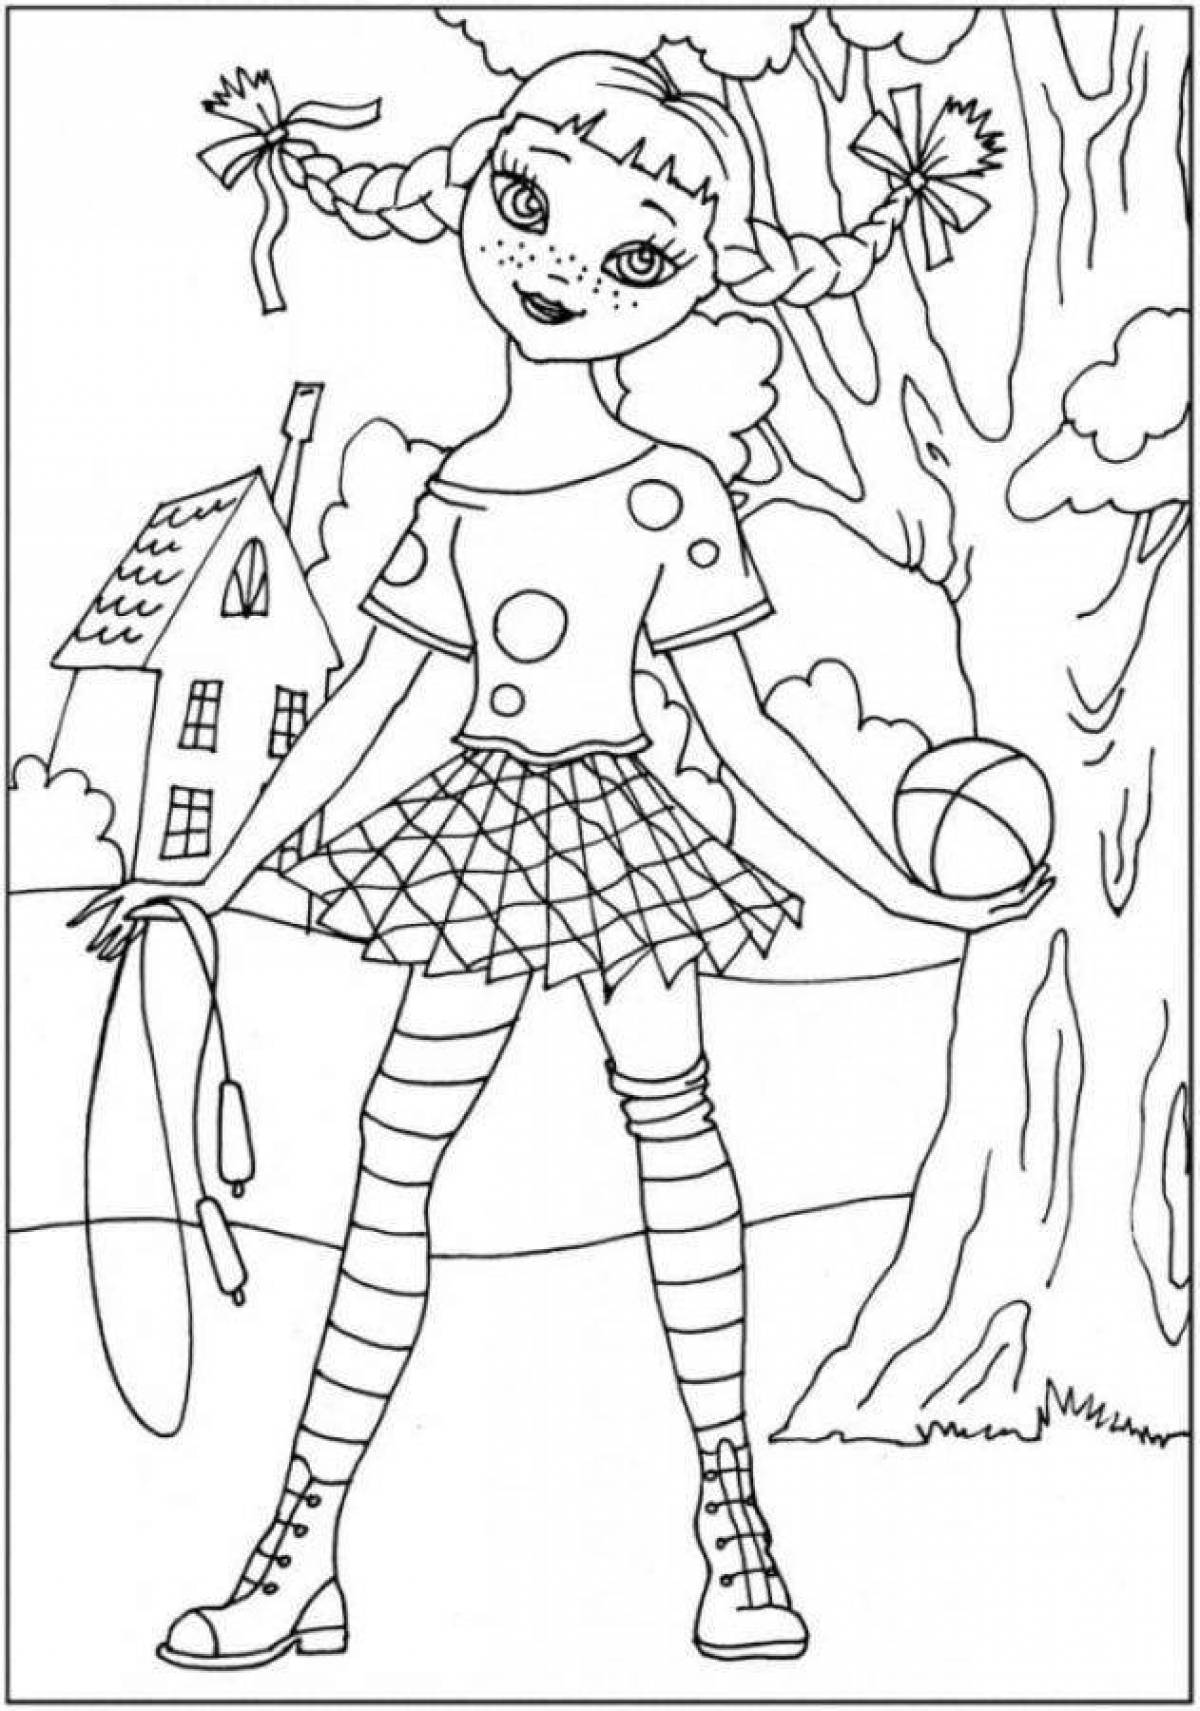 Outstanding coloring pippi longstocking